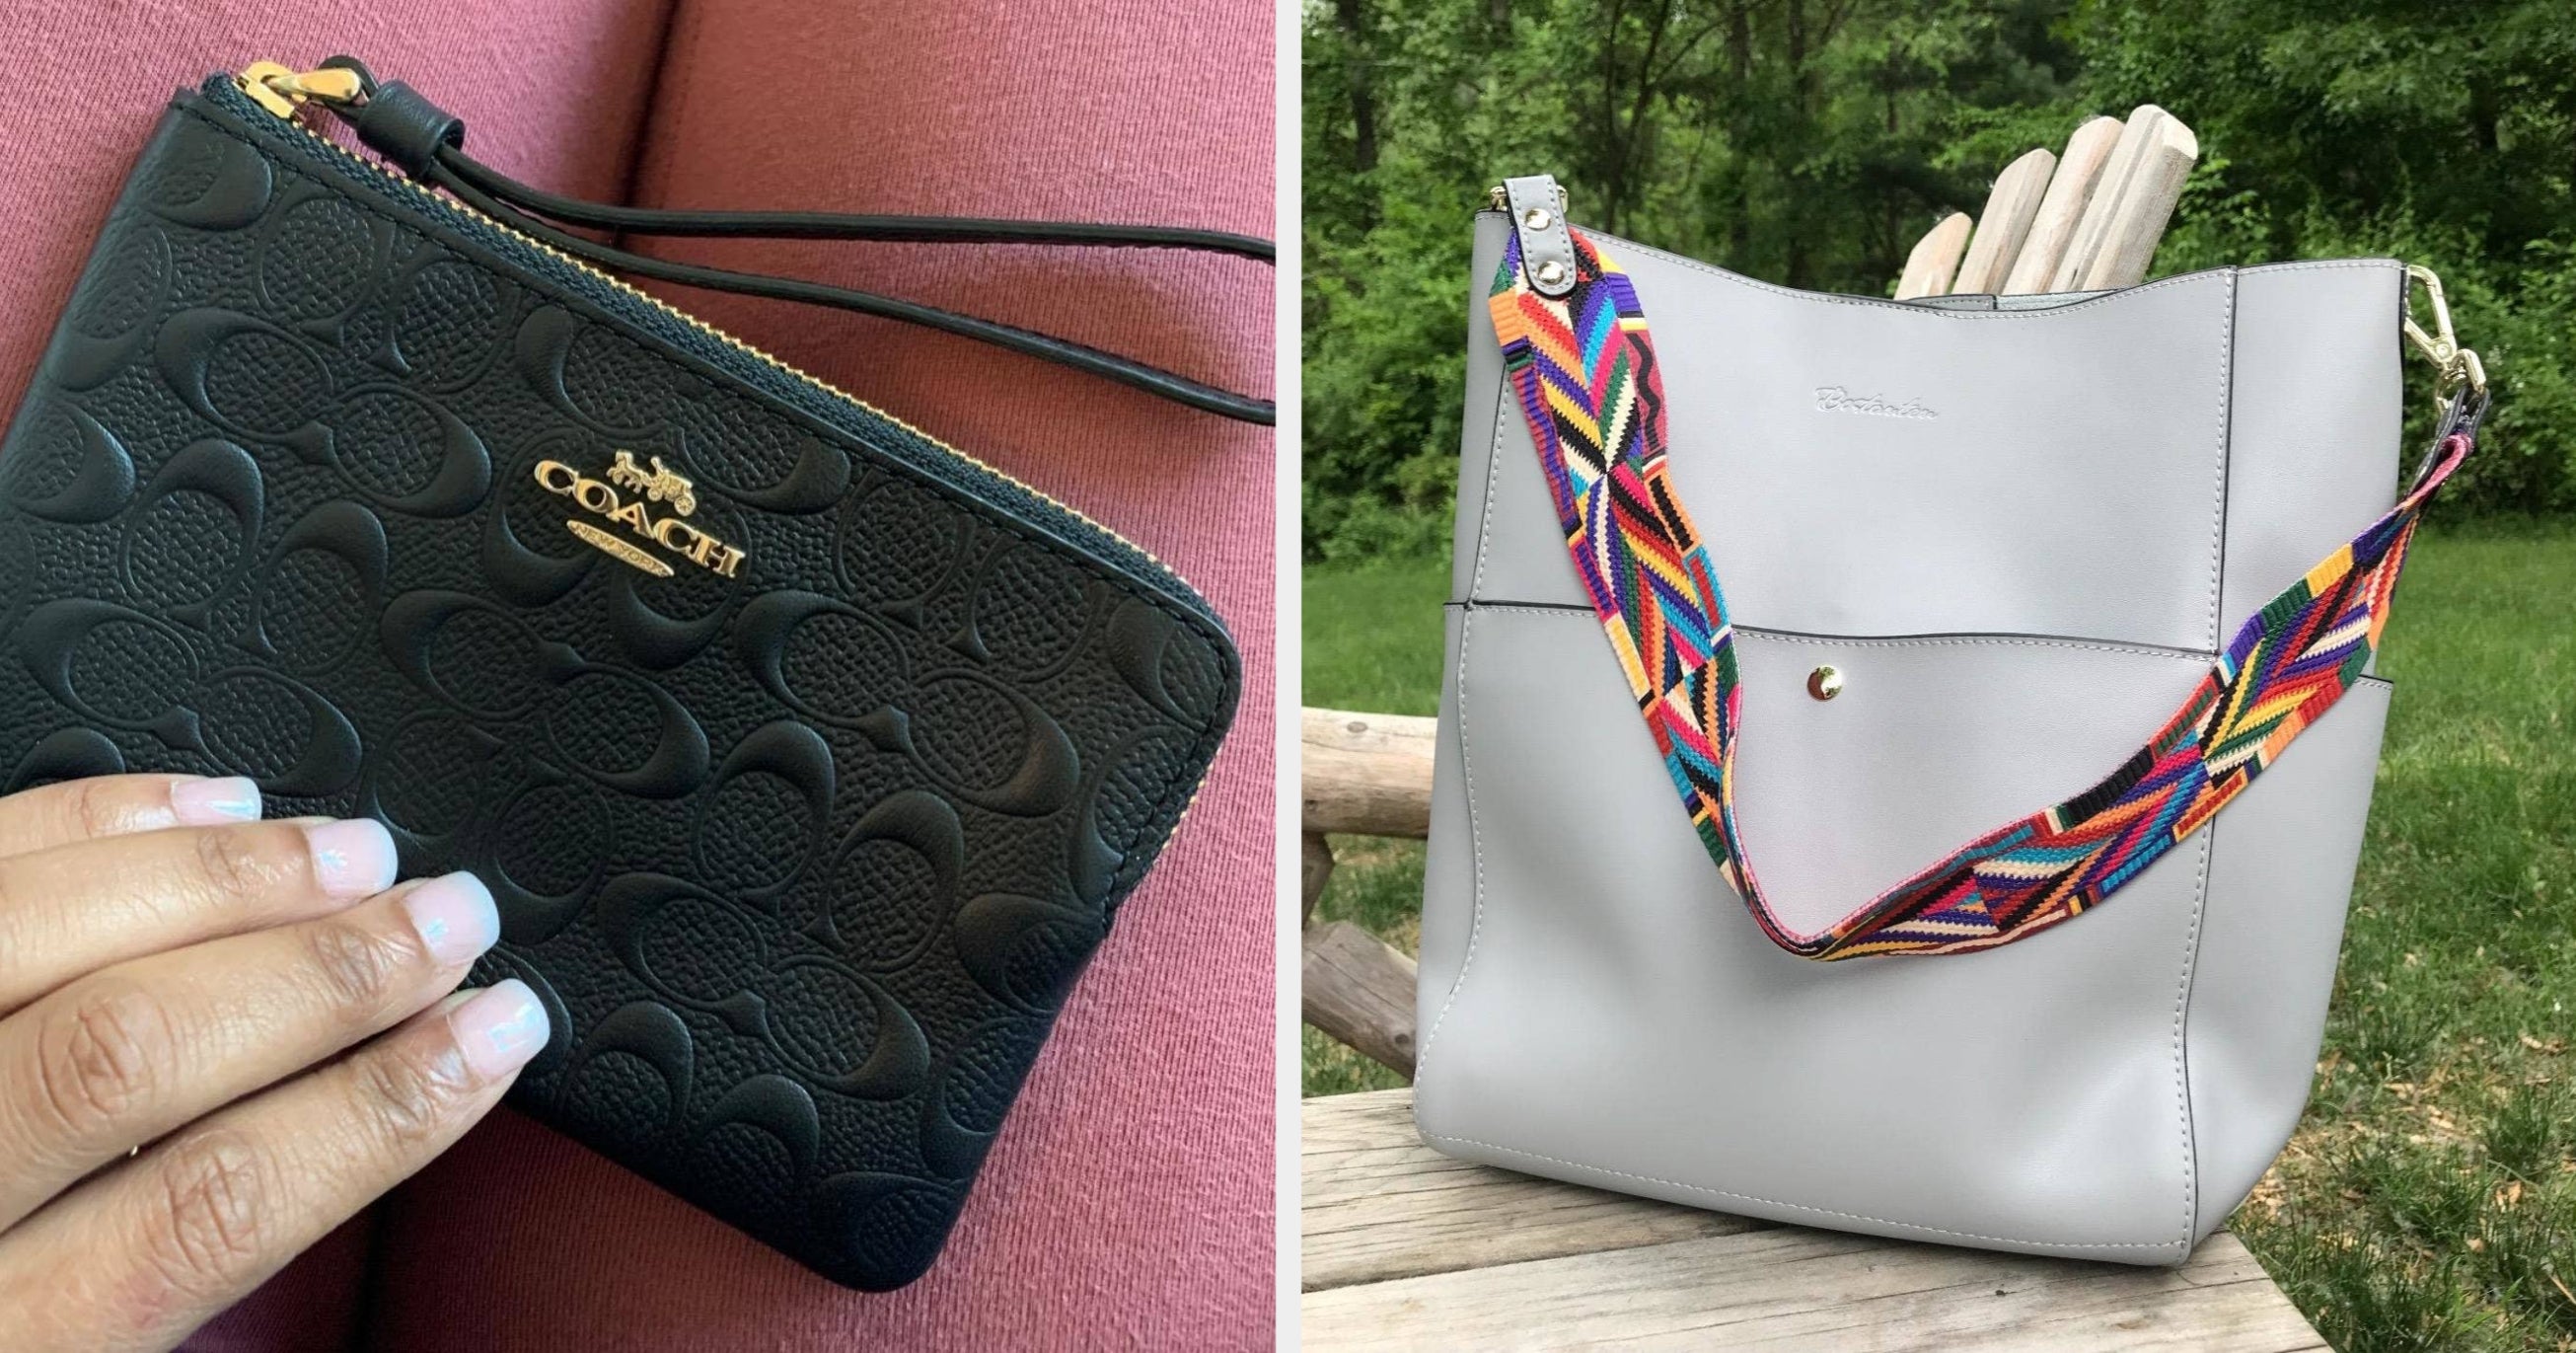 12 Designer Handbag Dupes That Look High-End (but Keep Money in Your  Wallet) - MY CHIC OBSESSION